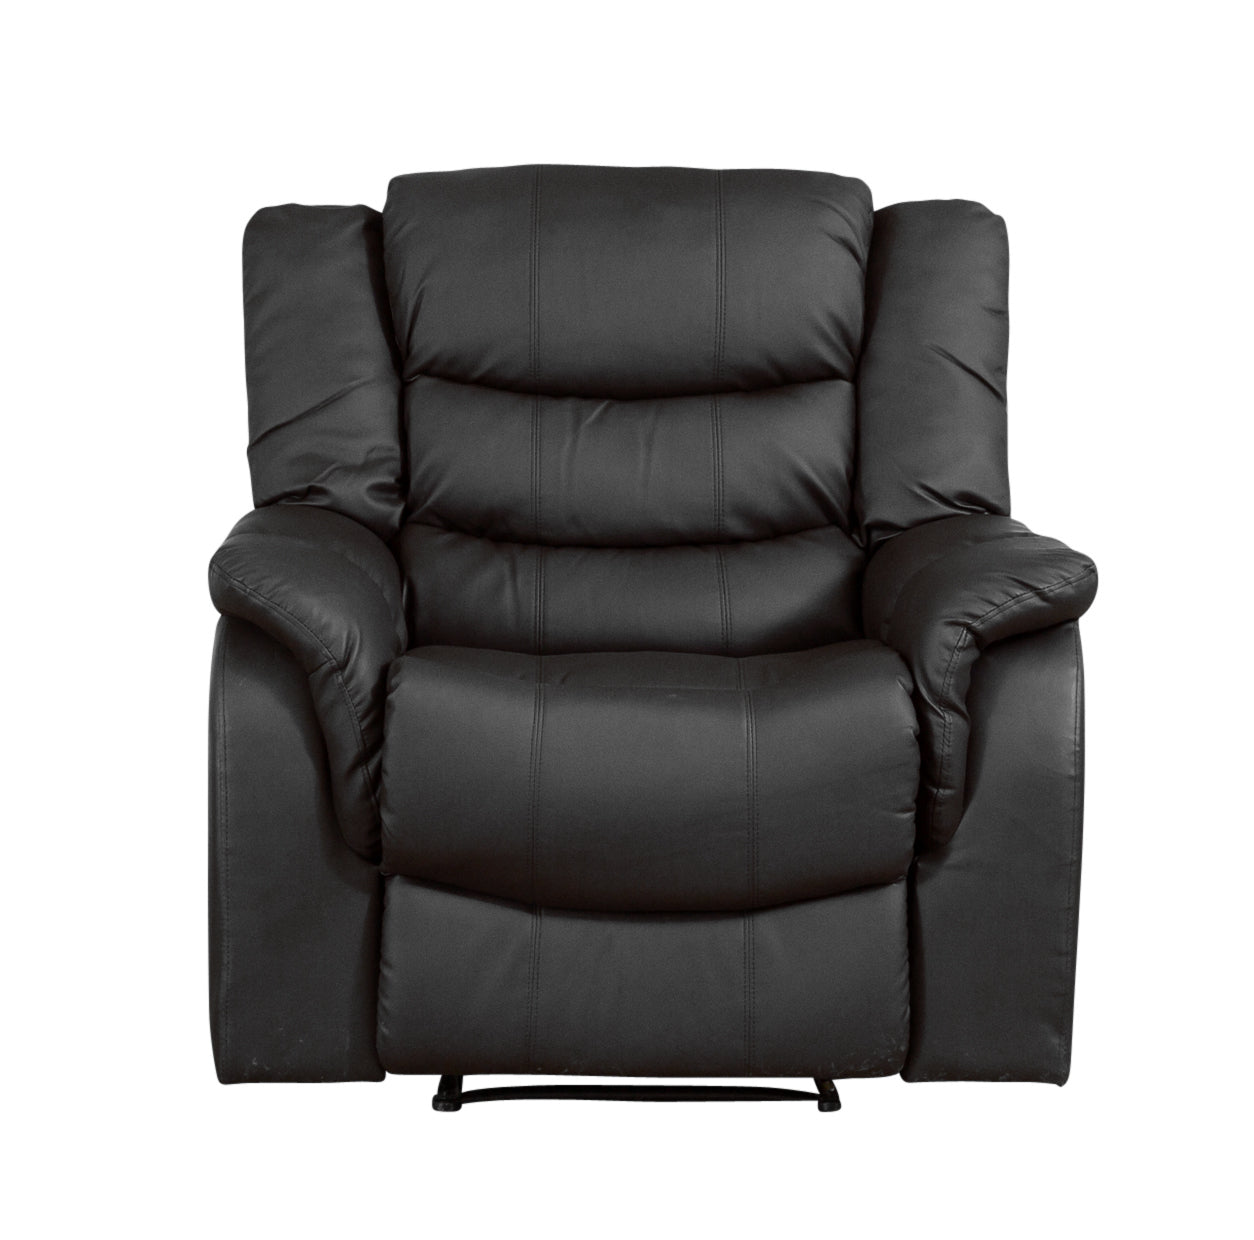 Mid Size Commercial Grade Leather Recliner Sofa Available in Black, Brown, Burgundy, Cream, Grey * - CasaFenix